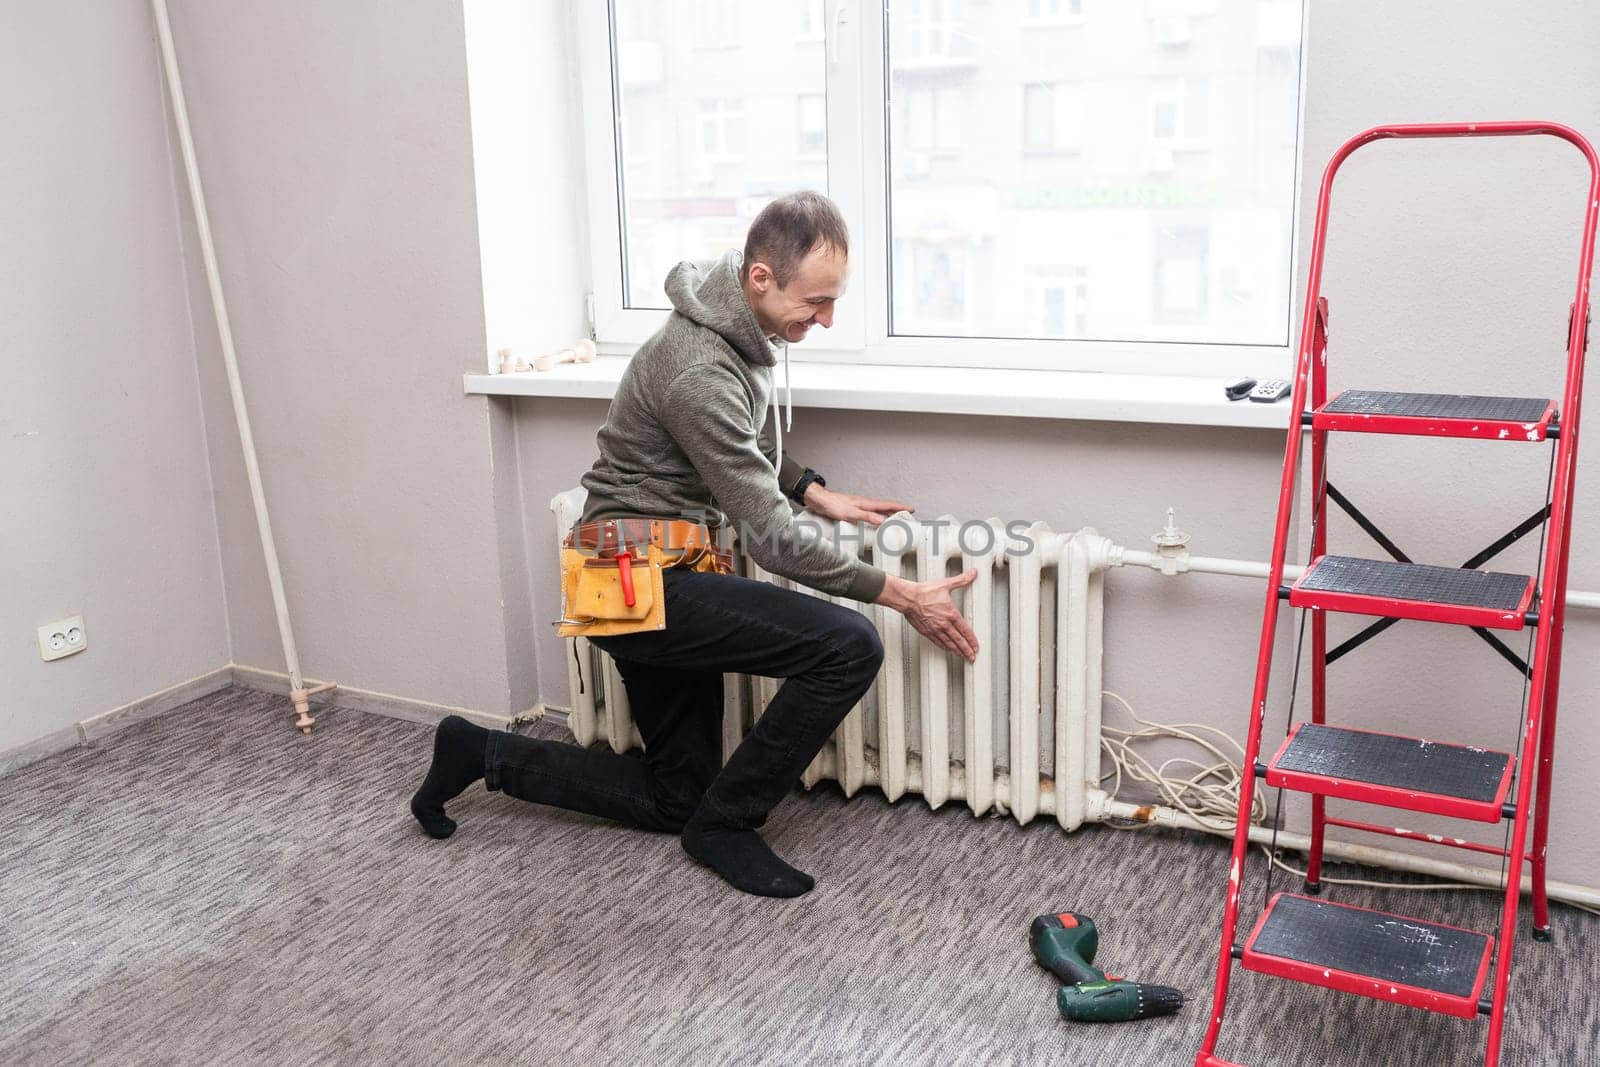 Worker replaces domestic radiator in the living room. High quality photo